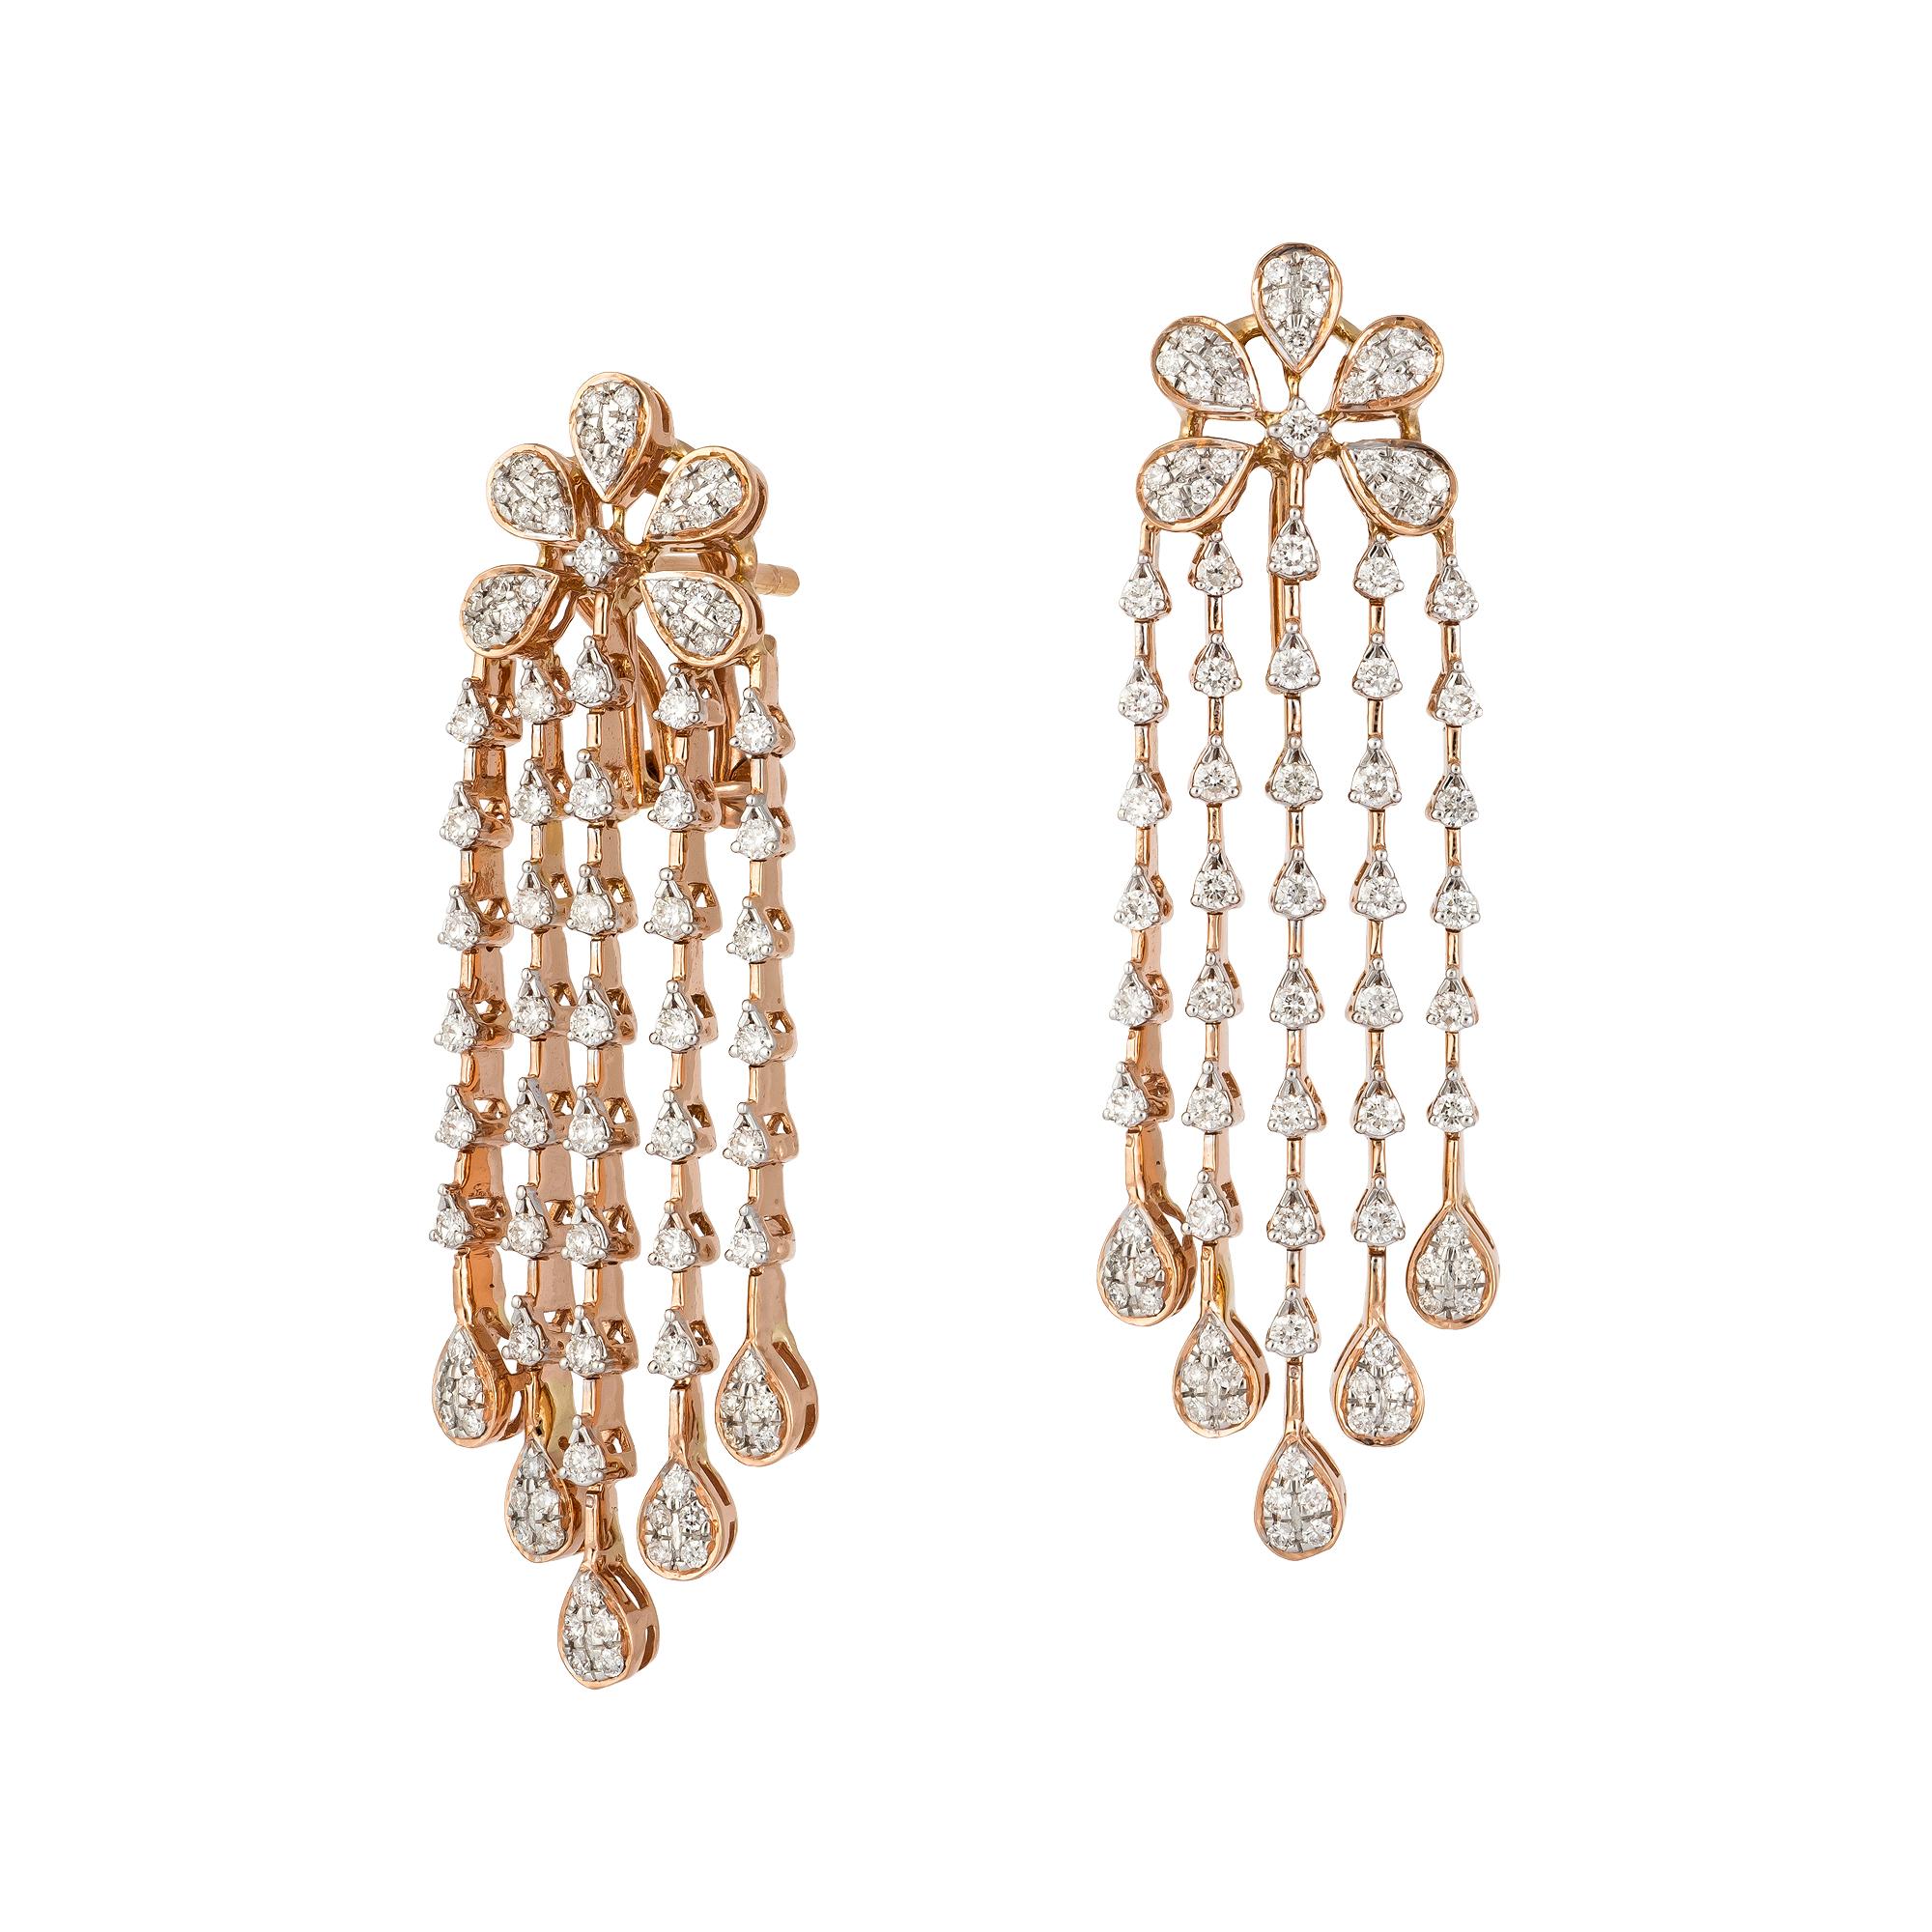 EARRING 18K Rose Gold Diamond 1.29 Cts/170 Pieces
